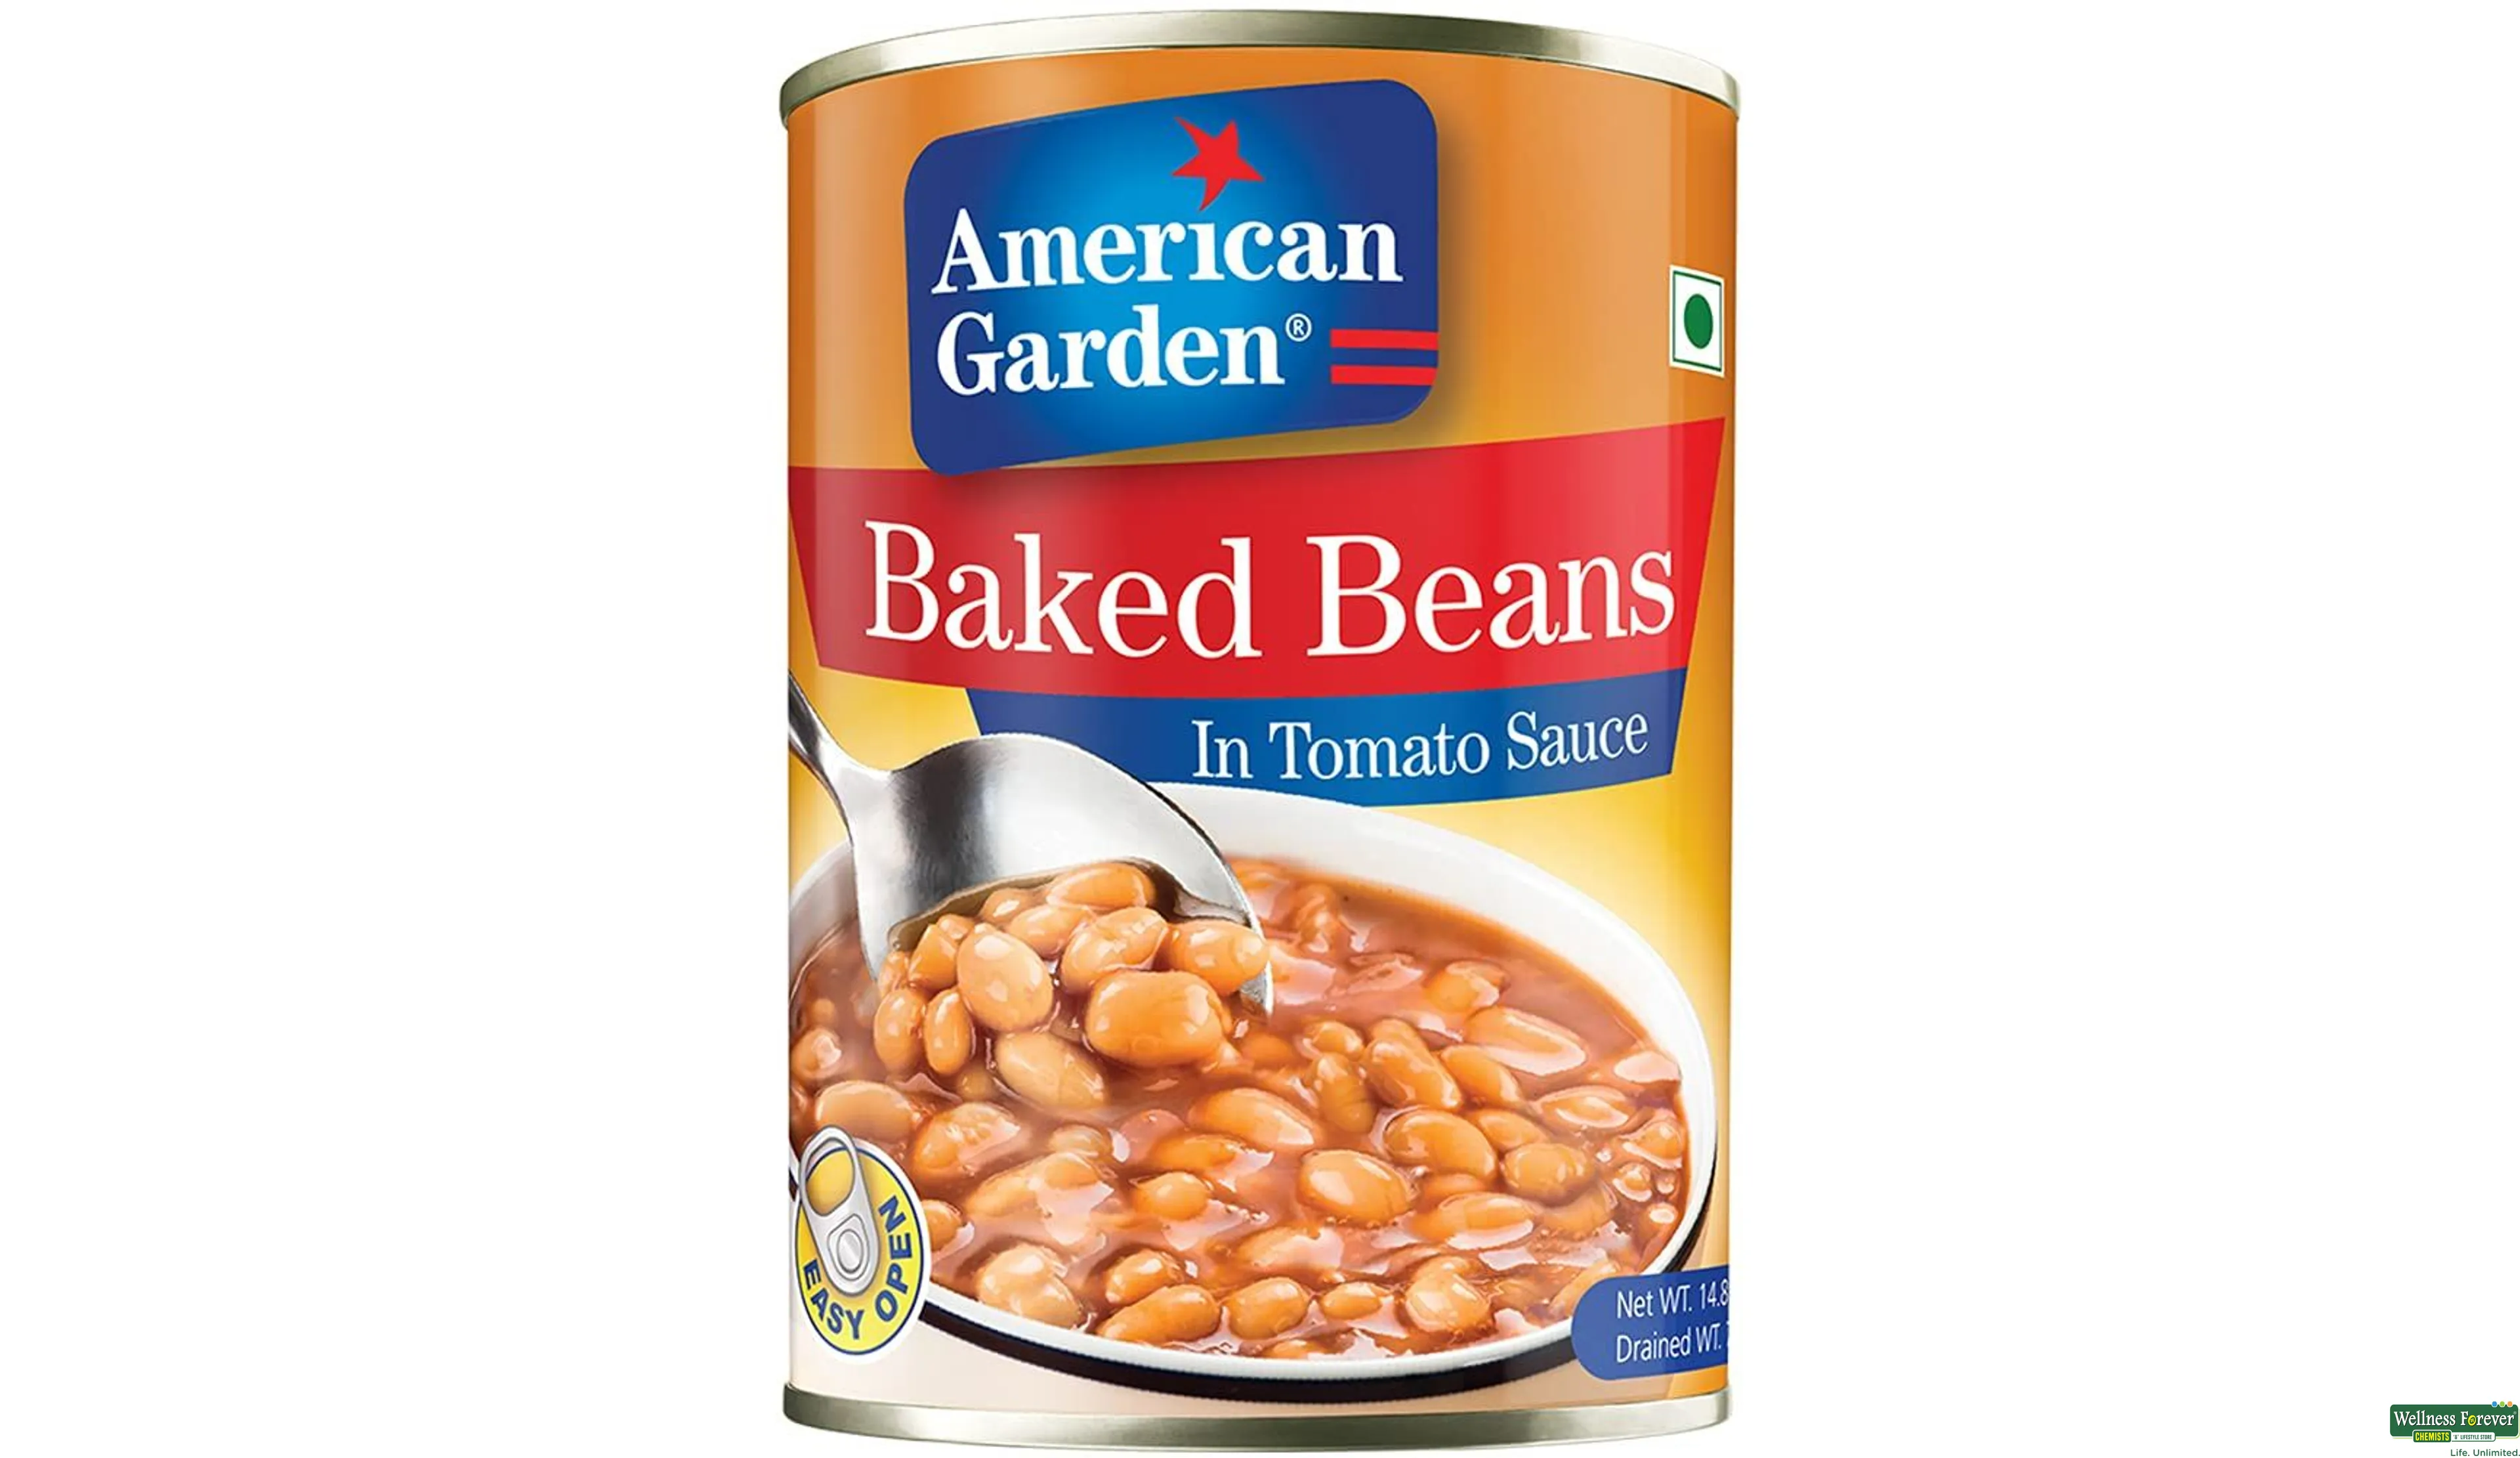 AMERICAN BAKED BEANS 420GM- 1, 420GM, 